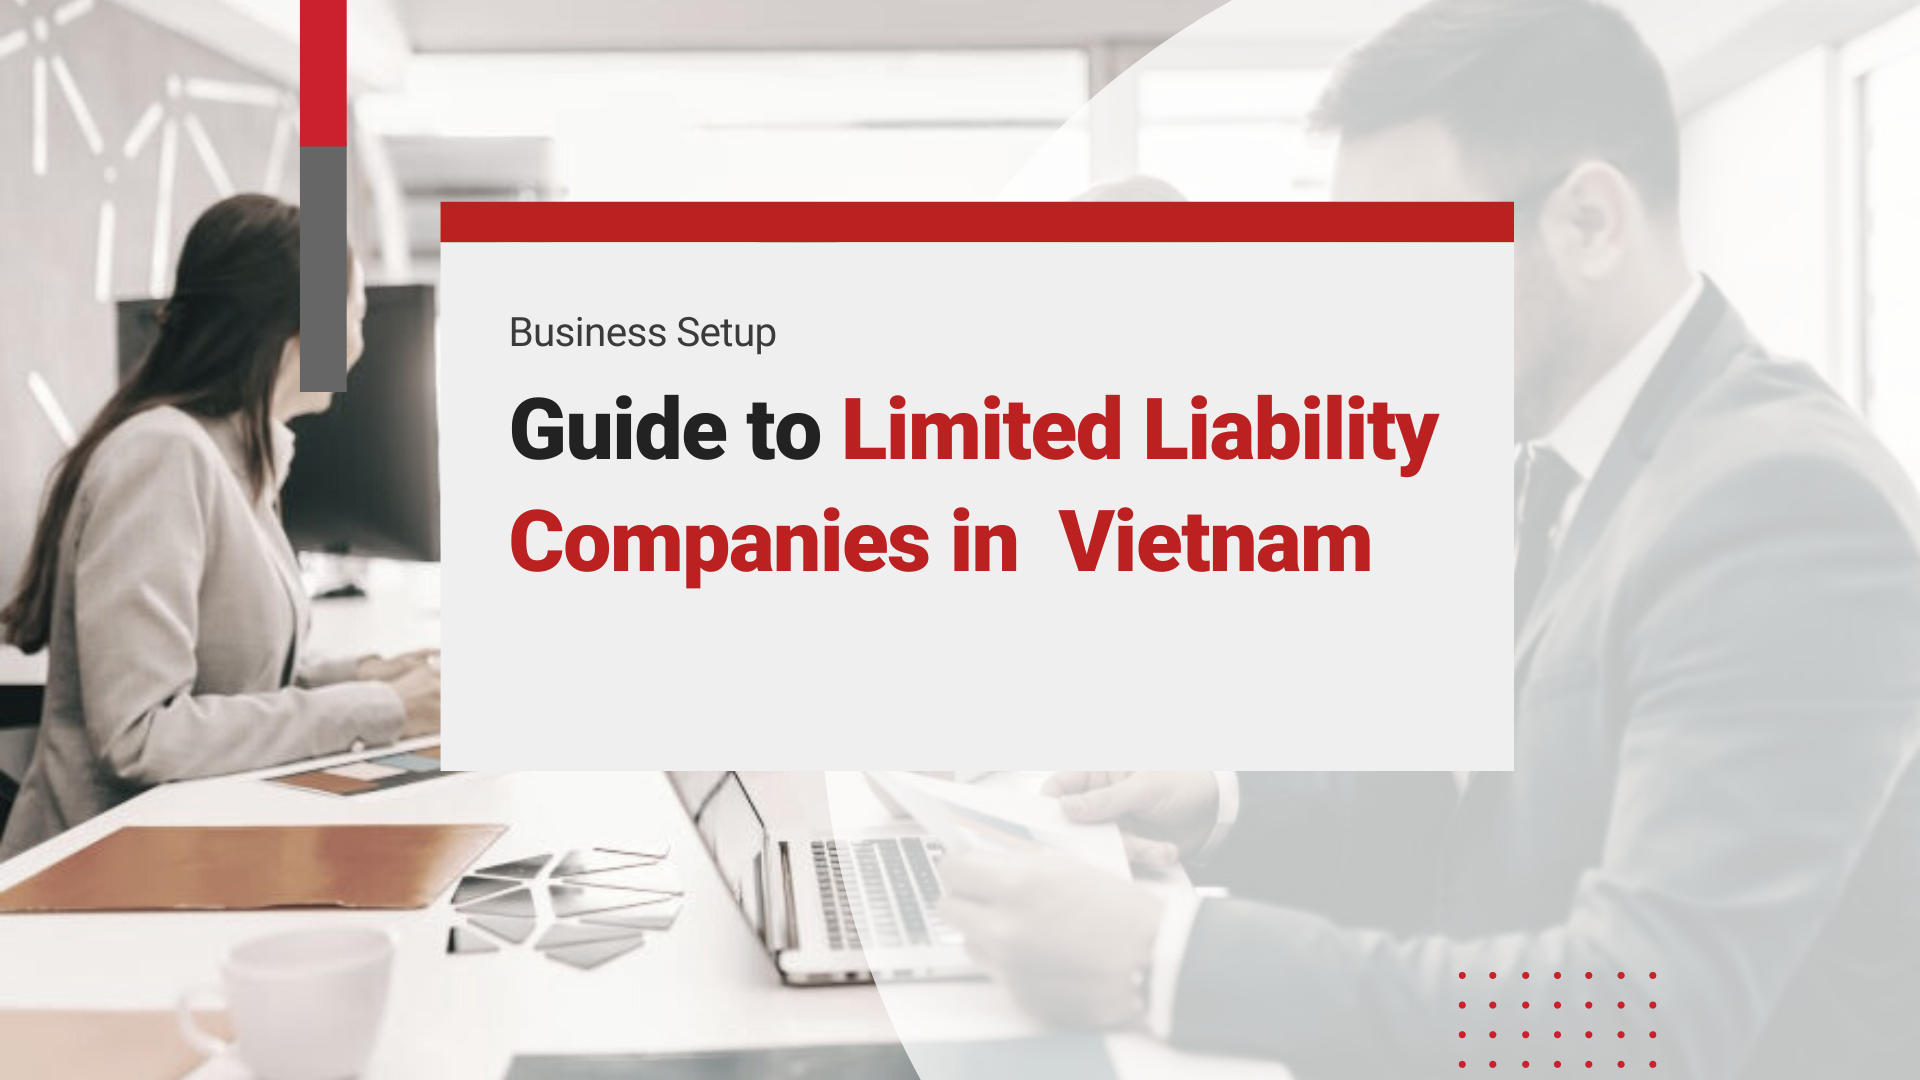 Starting and Operating a Limited Liability Company (LLC) in Vietnam: The Last Guide You’ll Ever Need